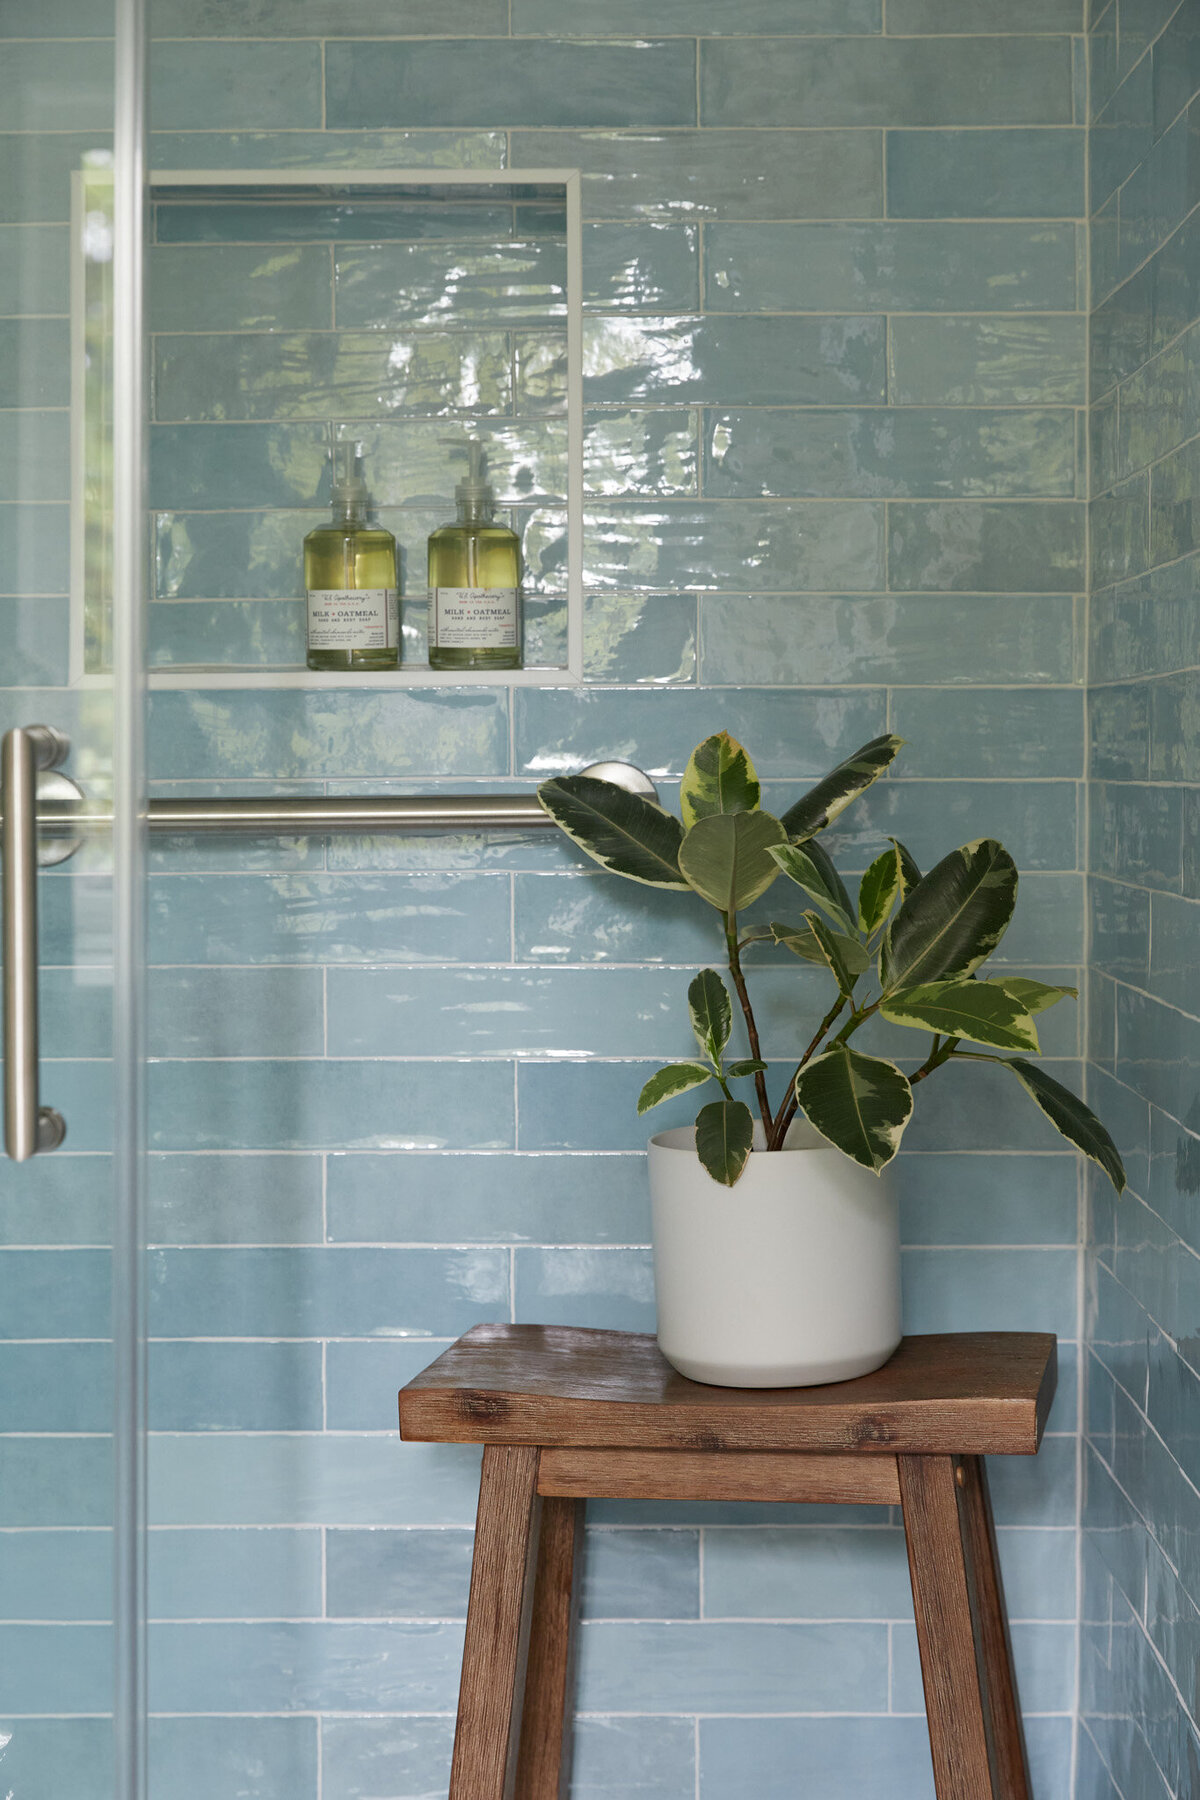 Shower with blue subway tile and a niche with a bottle of soap in it. A wooden stool in the shower with a plant in a white vase sitting on top. White walls to the right of the shower with a silver towel bar and a white towel hanging on it.